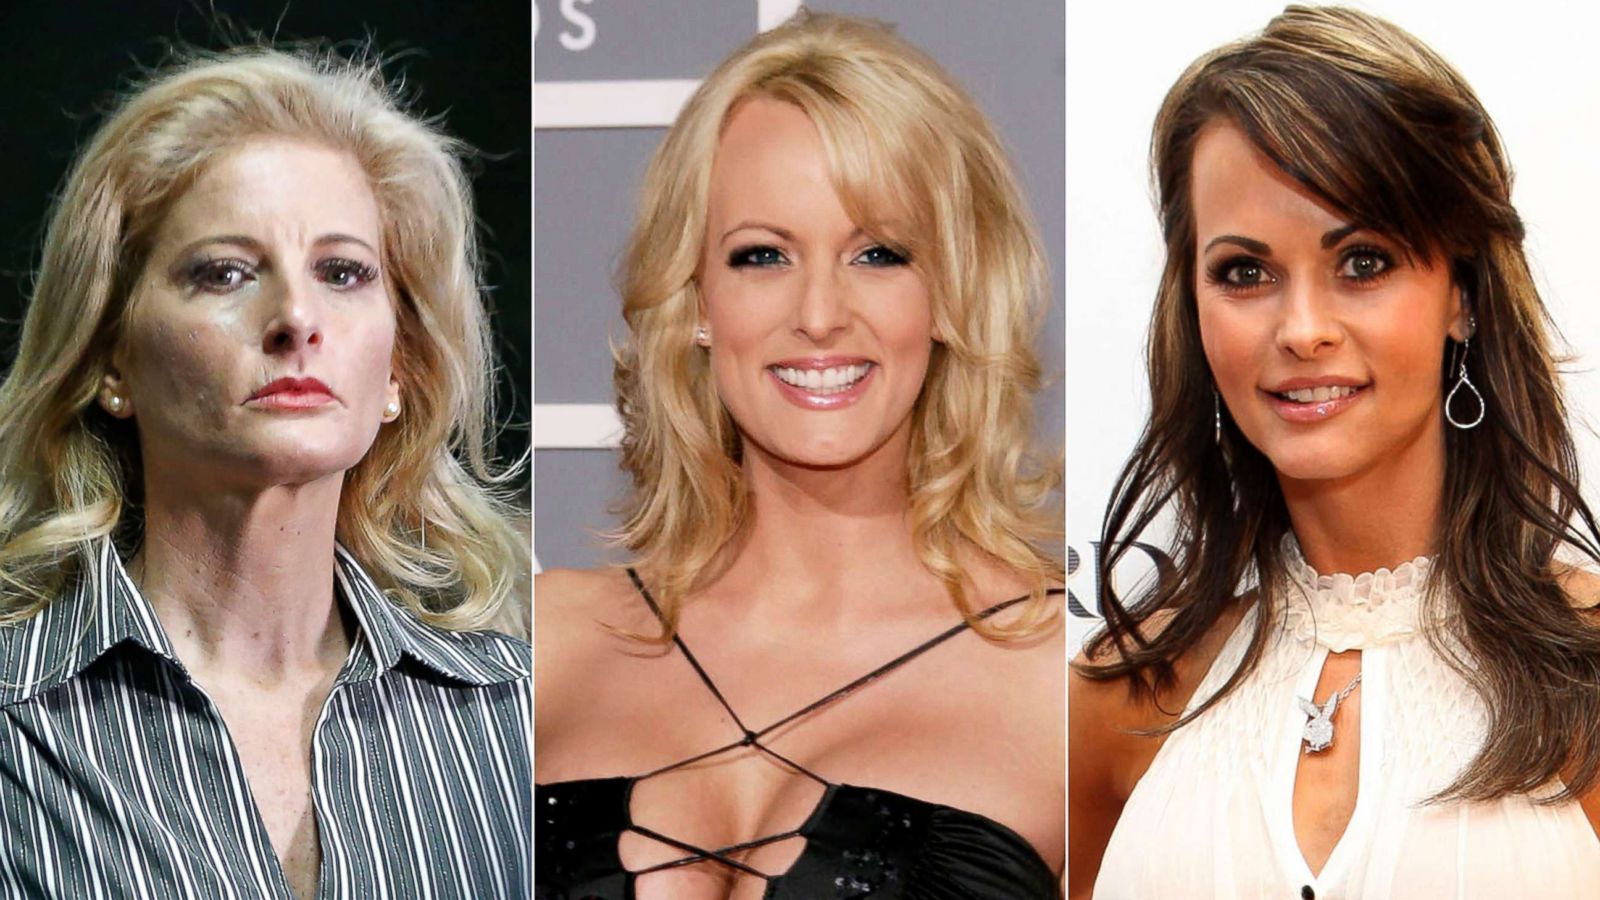 These 3 women are suing Trump and his associates